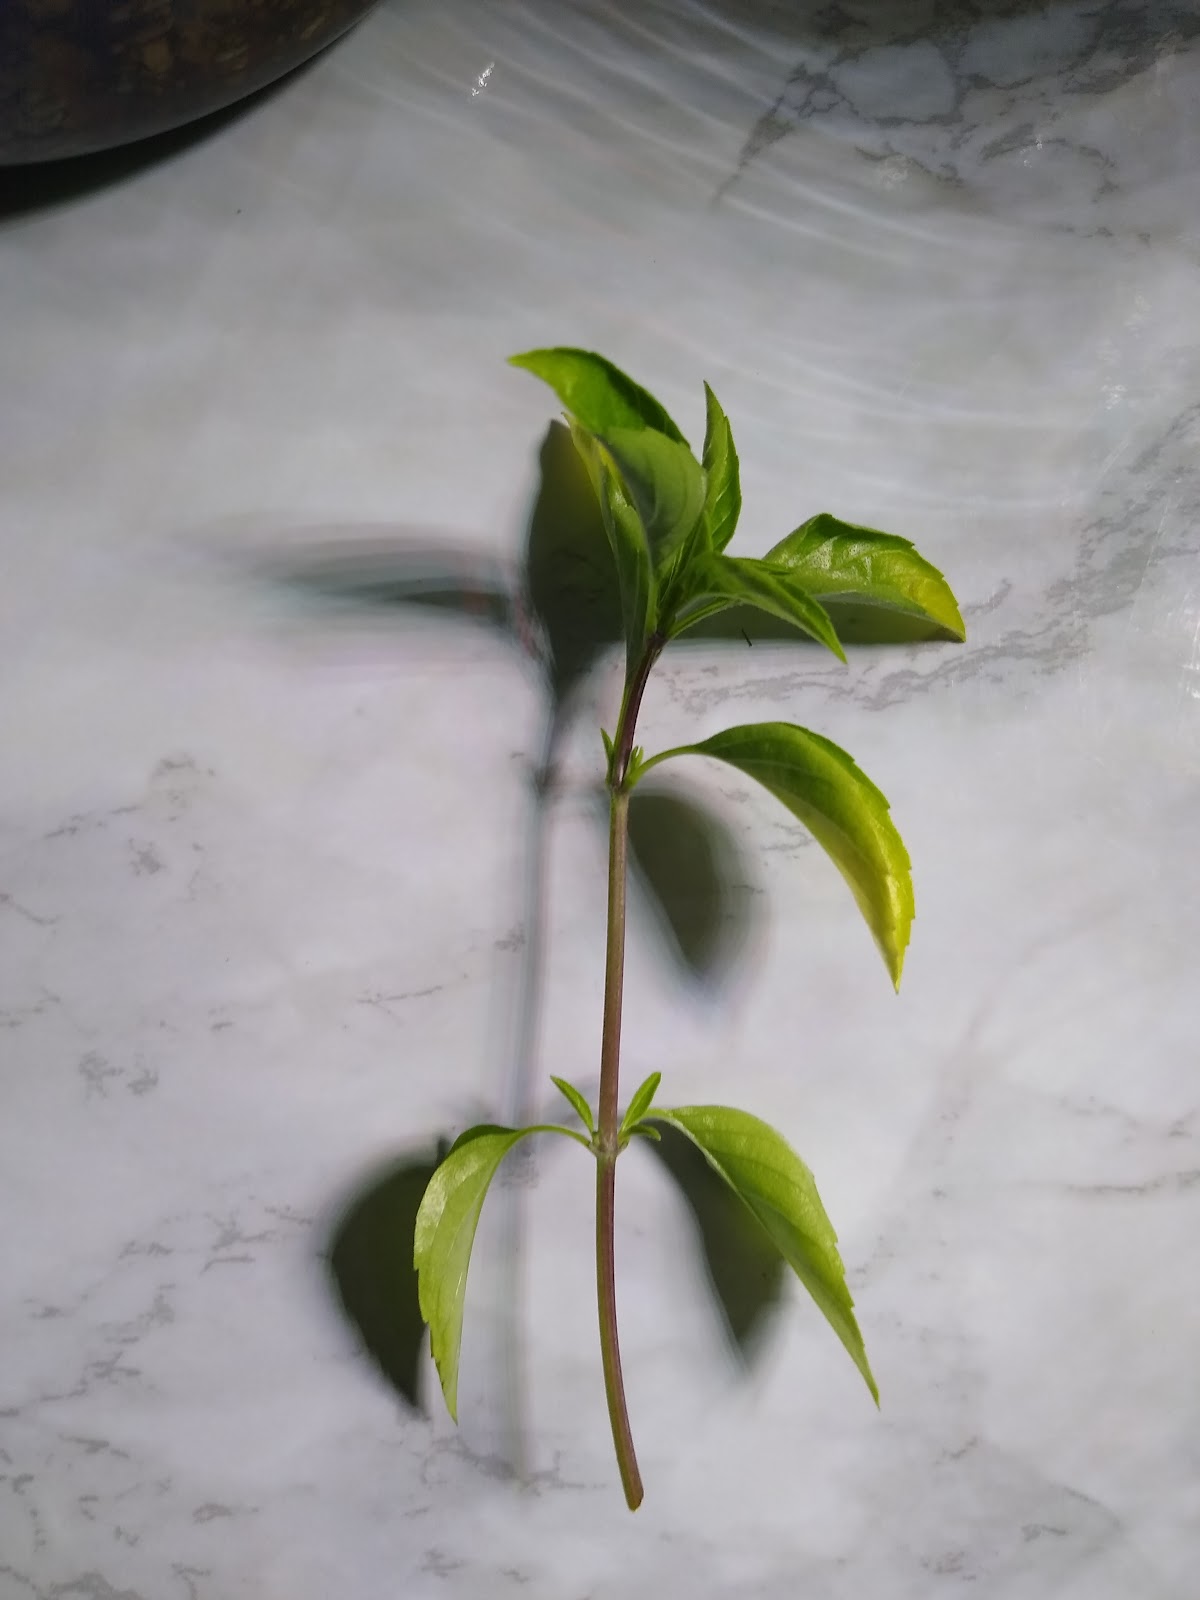 Thai basil clipping picture